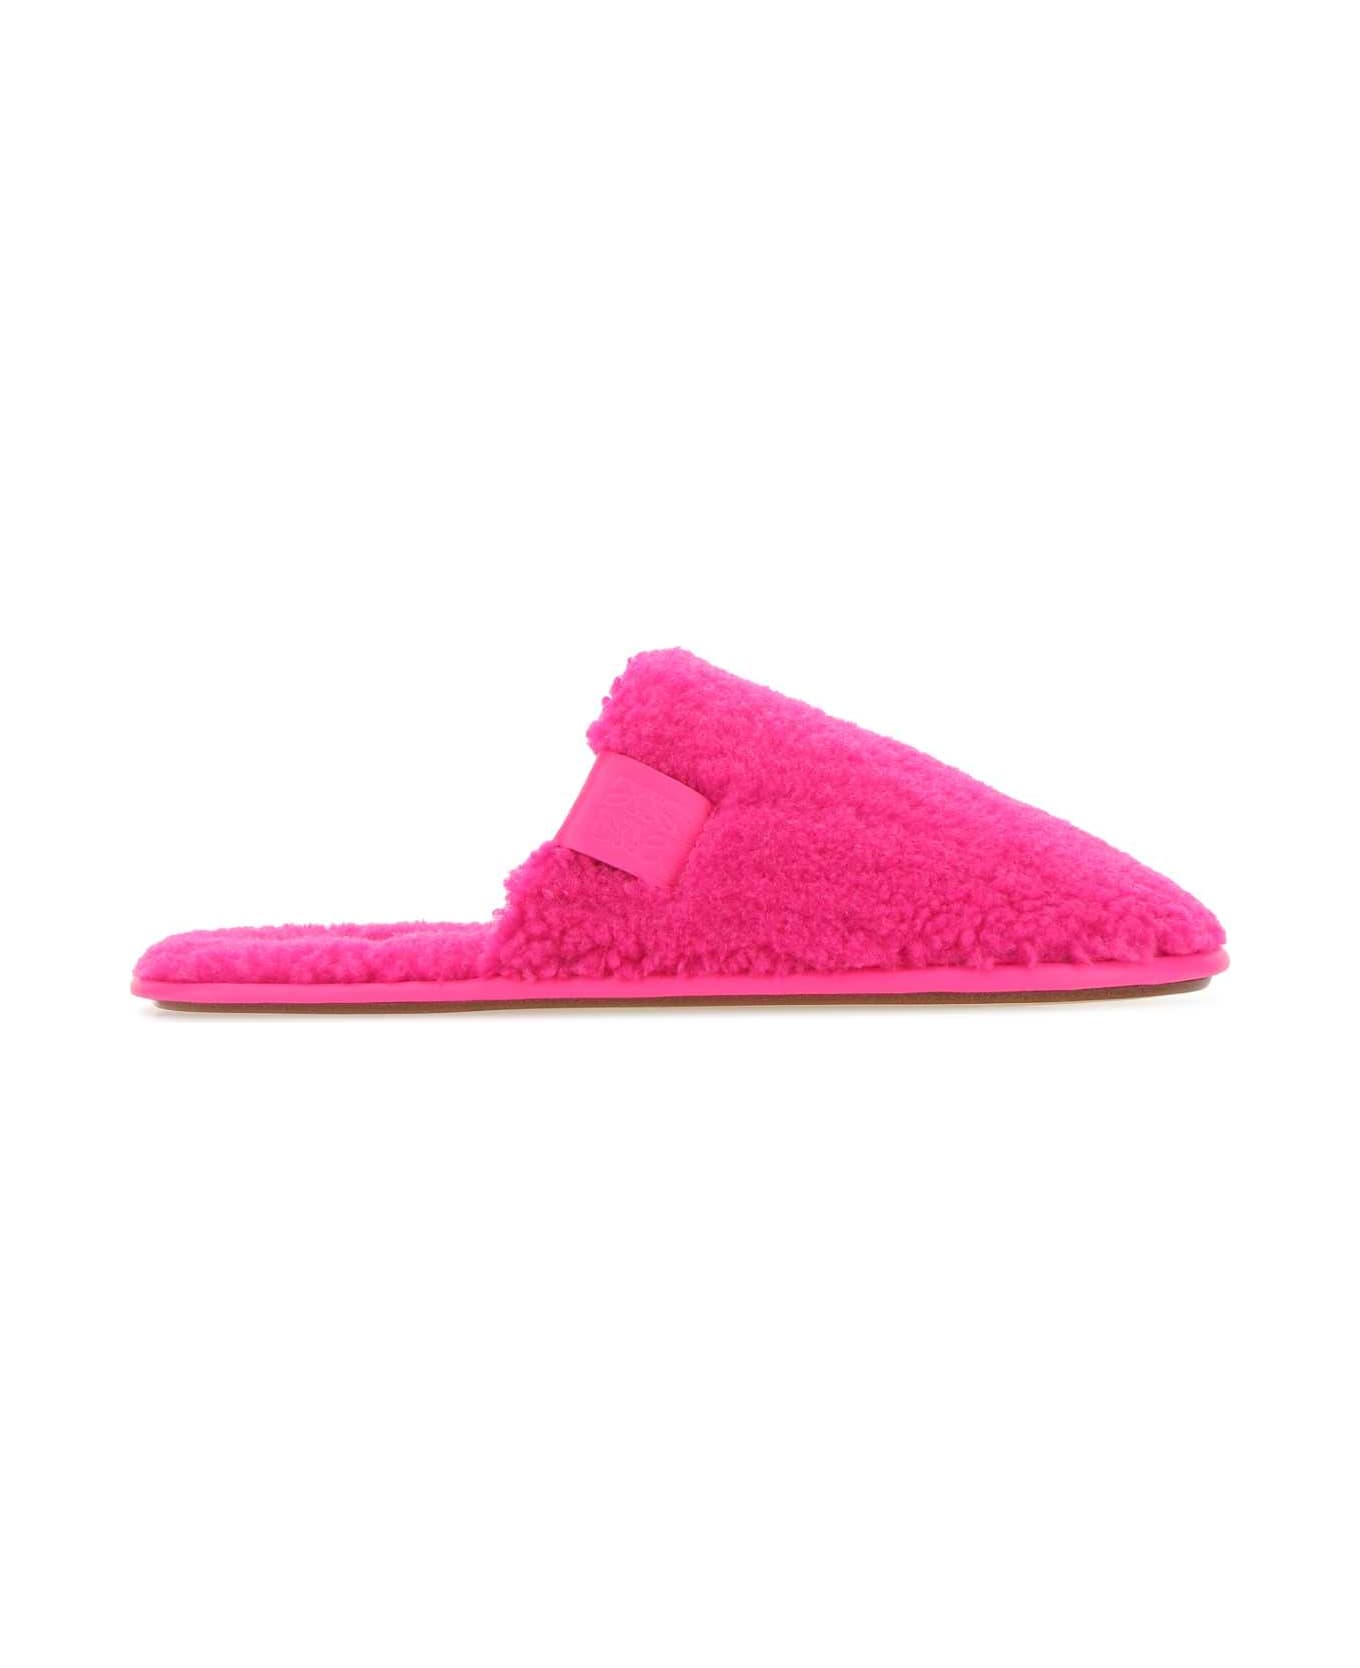 Loewe Fluo Pink Eco Shearling Slippers - NEONPINK